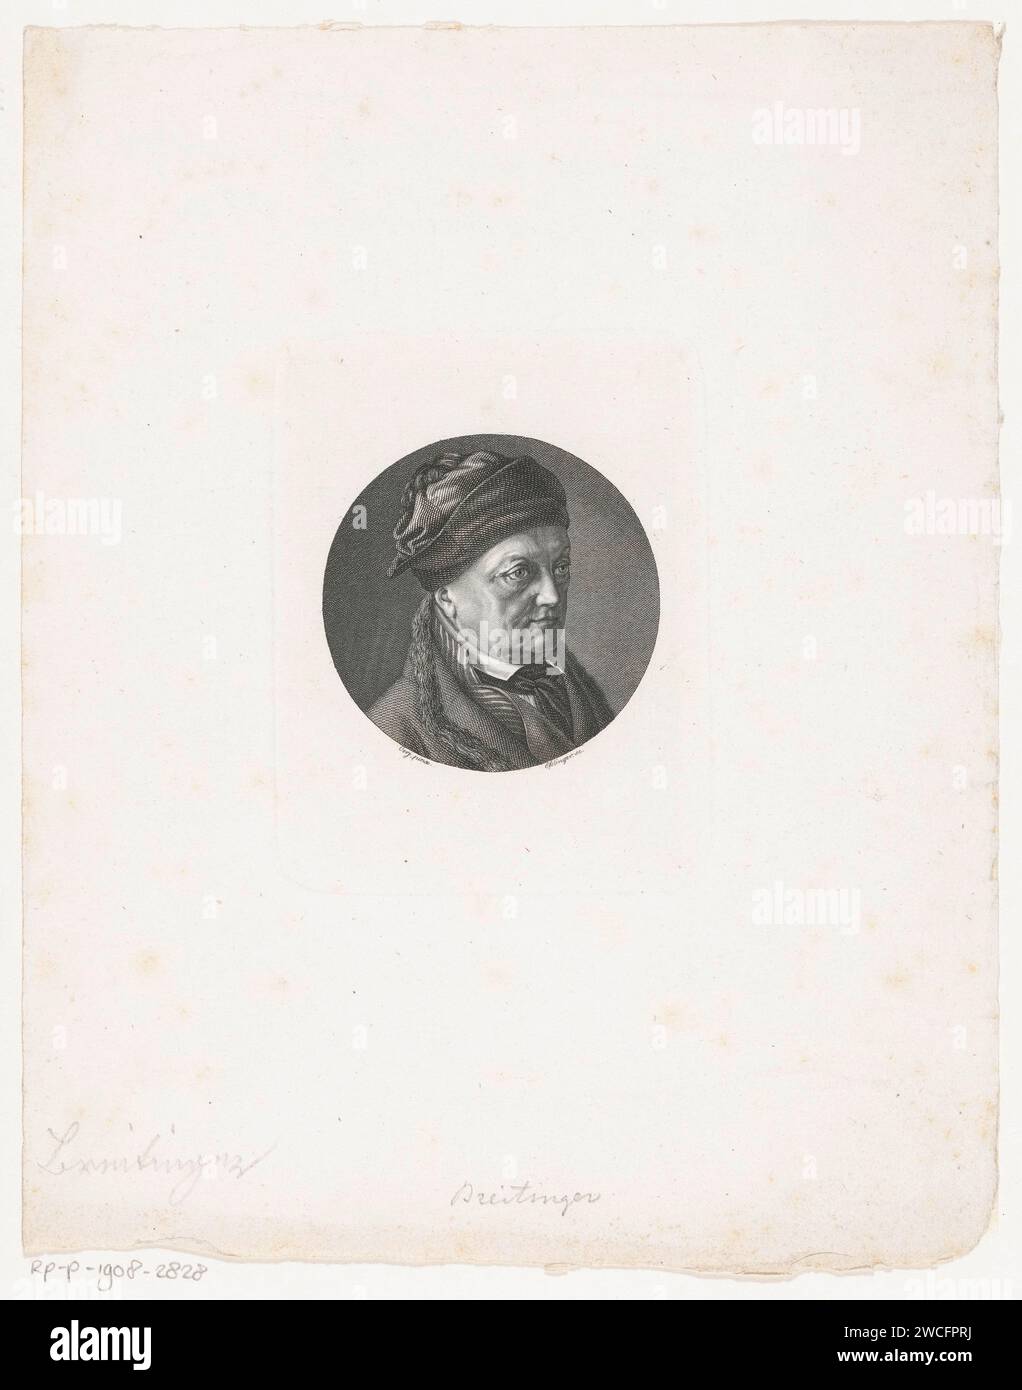 Portrait of an unknown man, Martin Esslinger, after Hans Jakob Oeri, 1803 - 1841 print   paper steel engraving anonymous historical person portrayed Stock Photo